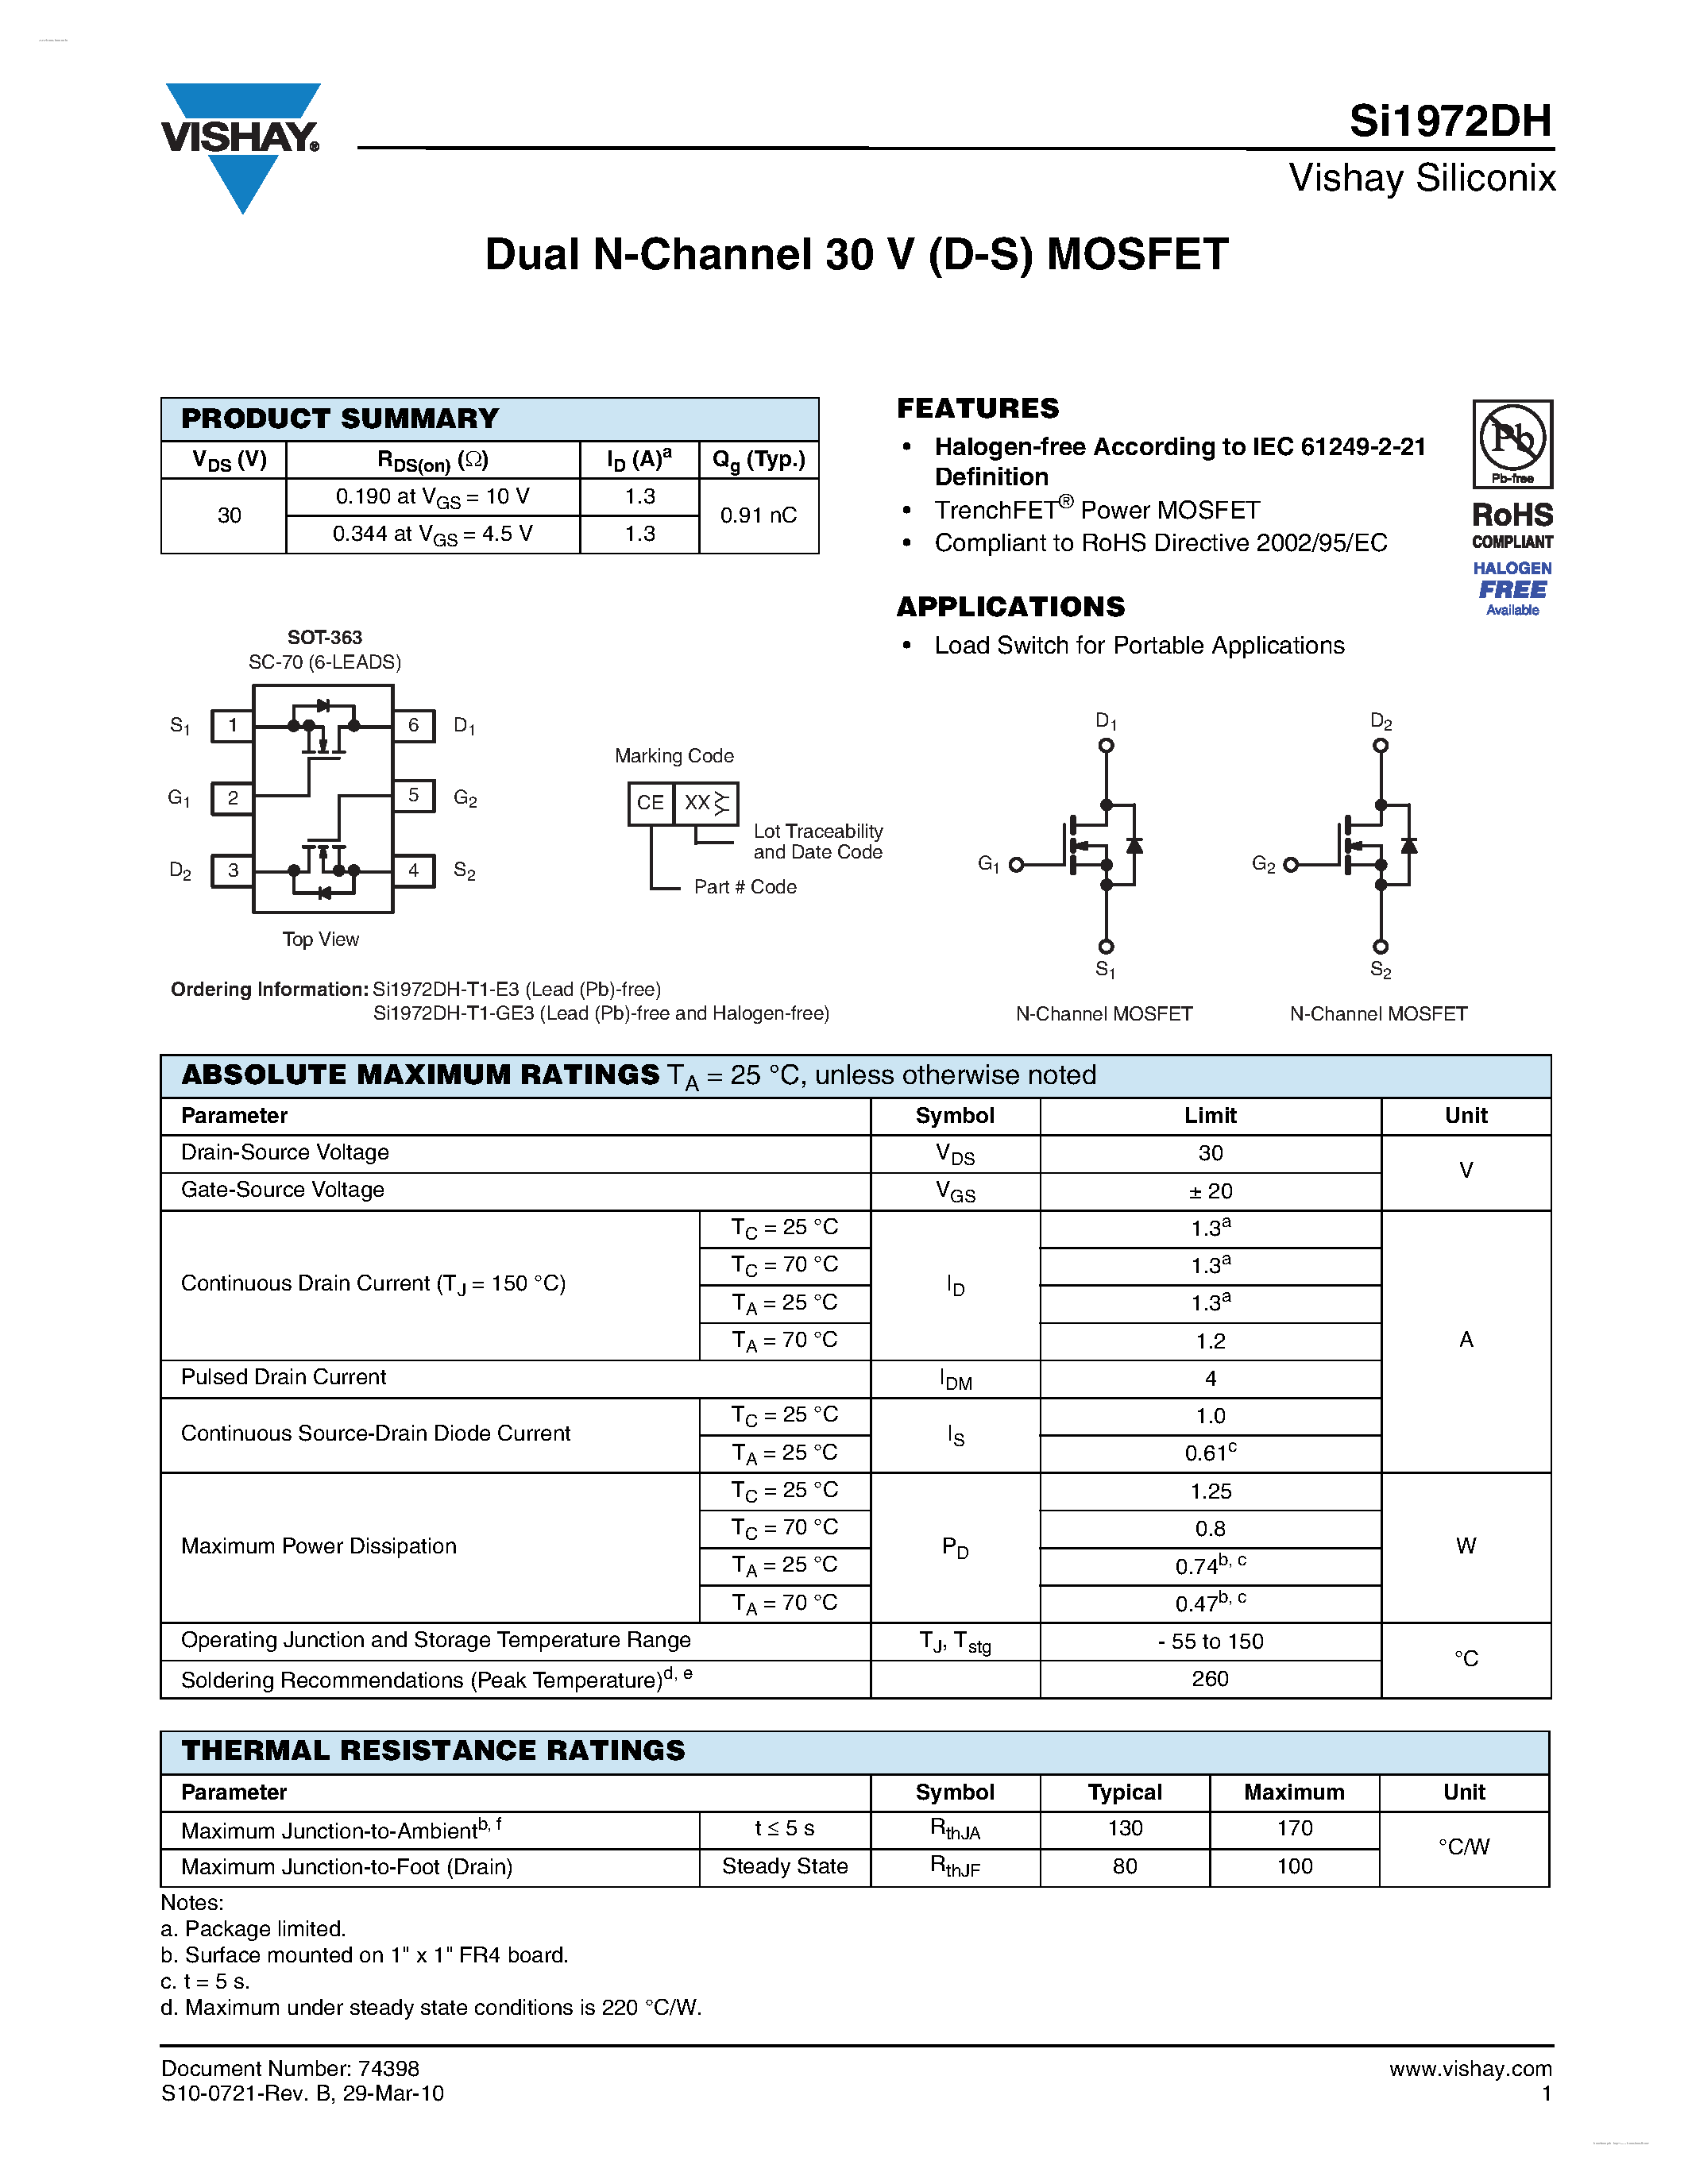 Datasheet SI1972DH - Dual N-Channel 30 V (D-S) MOSFET page 1